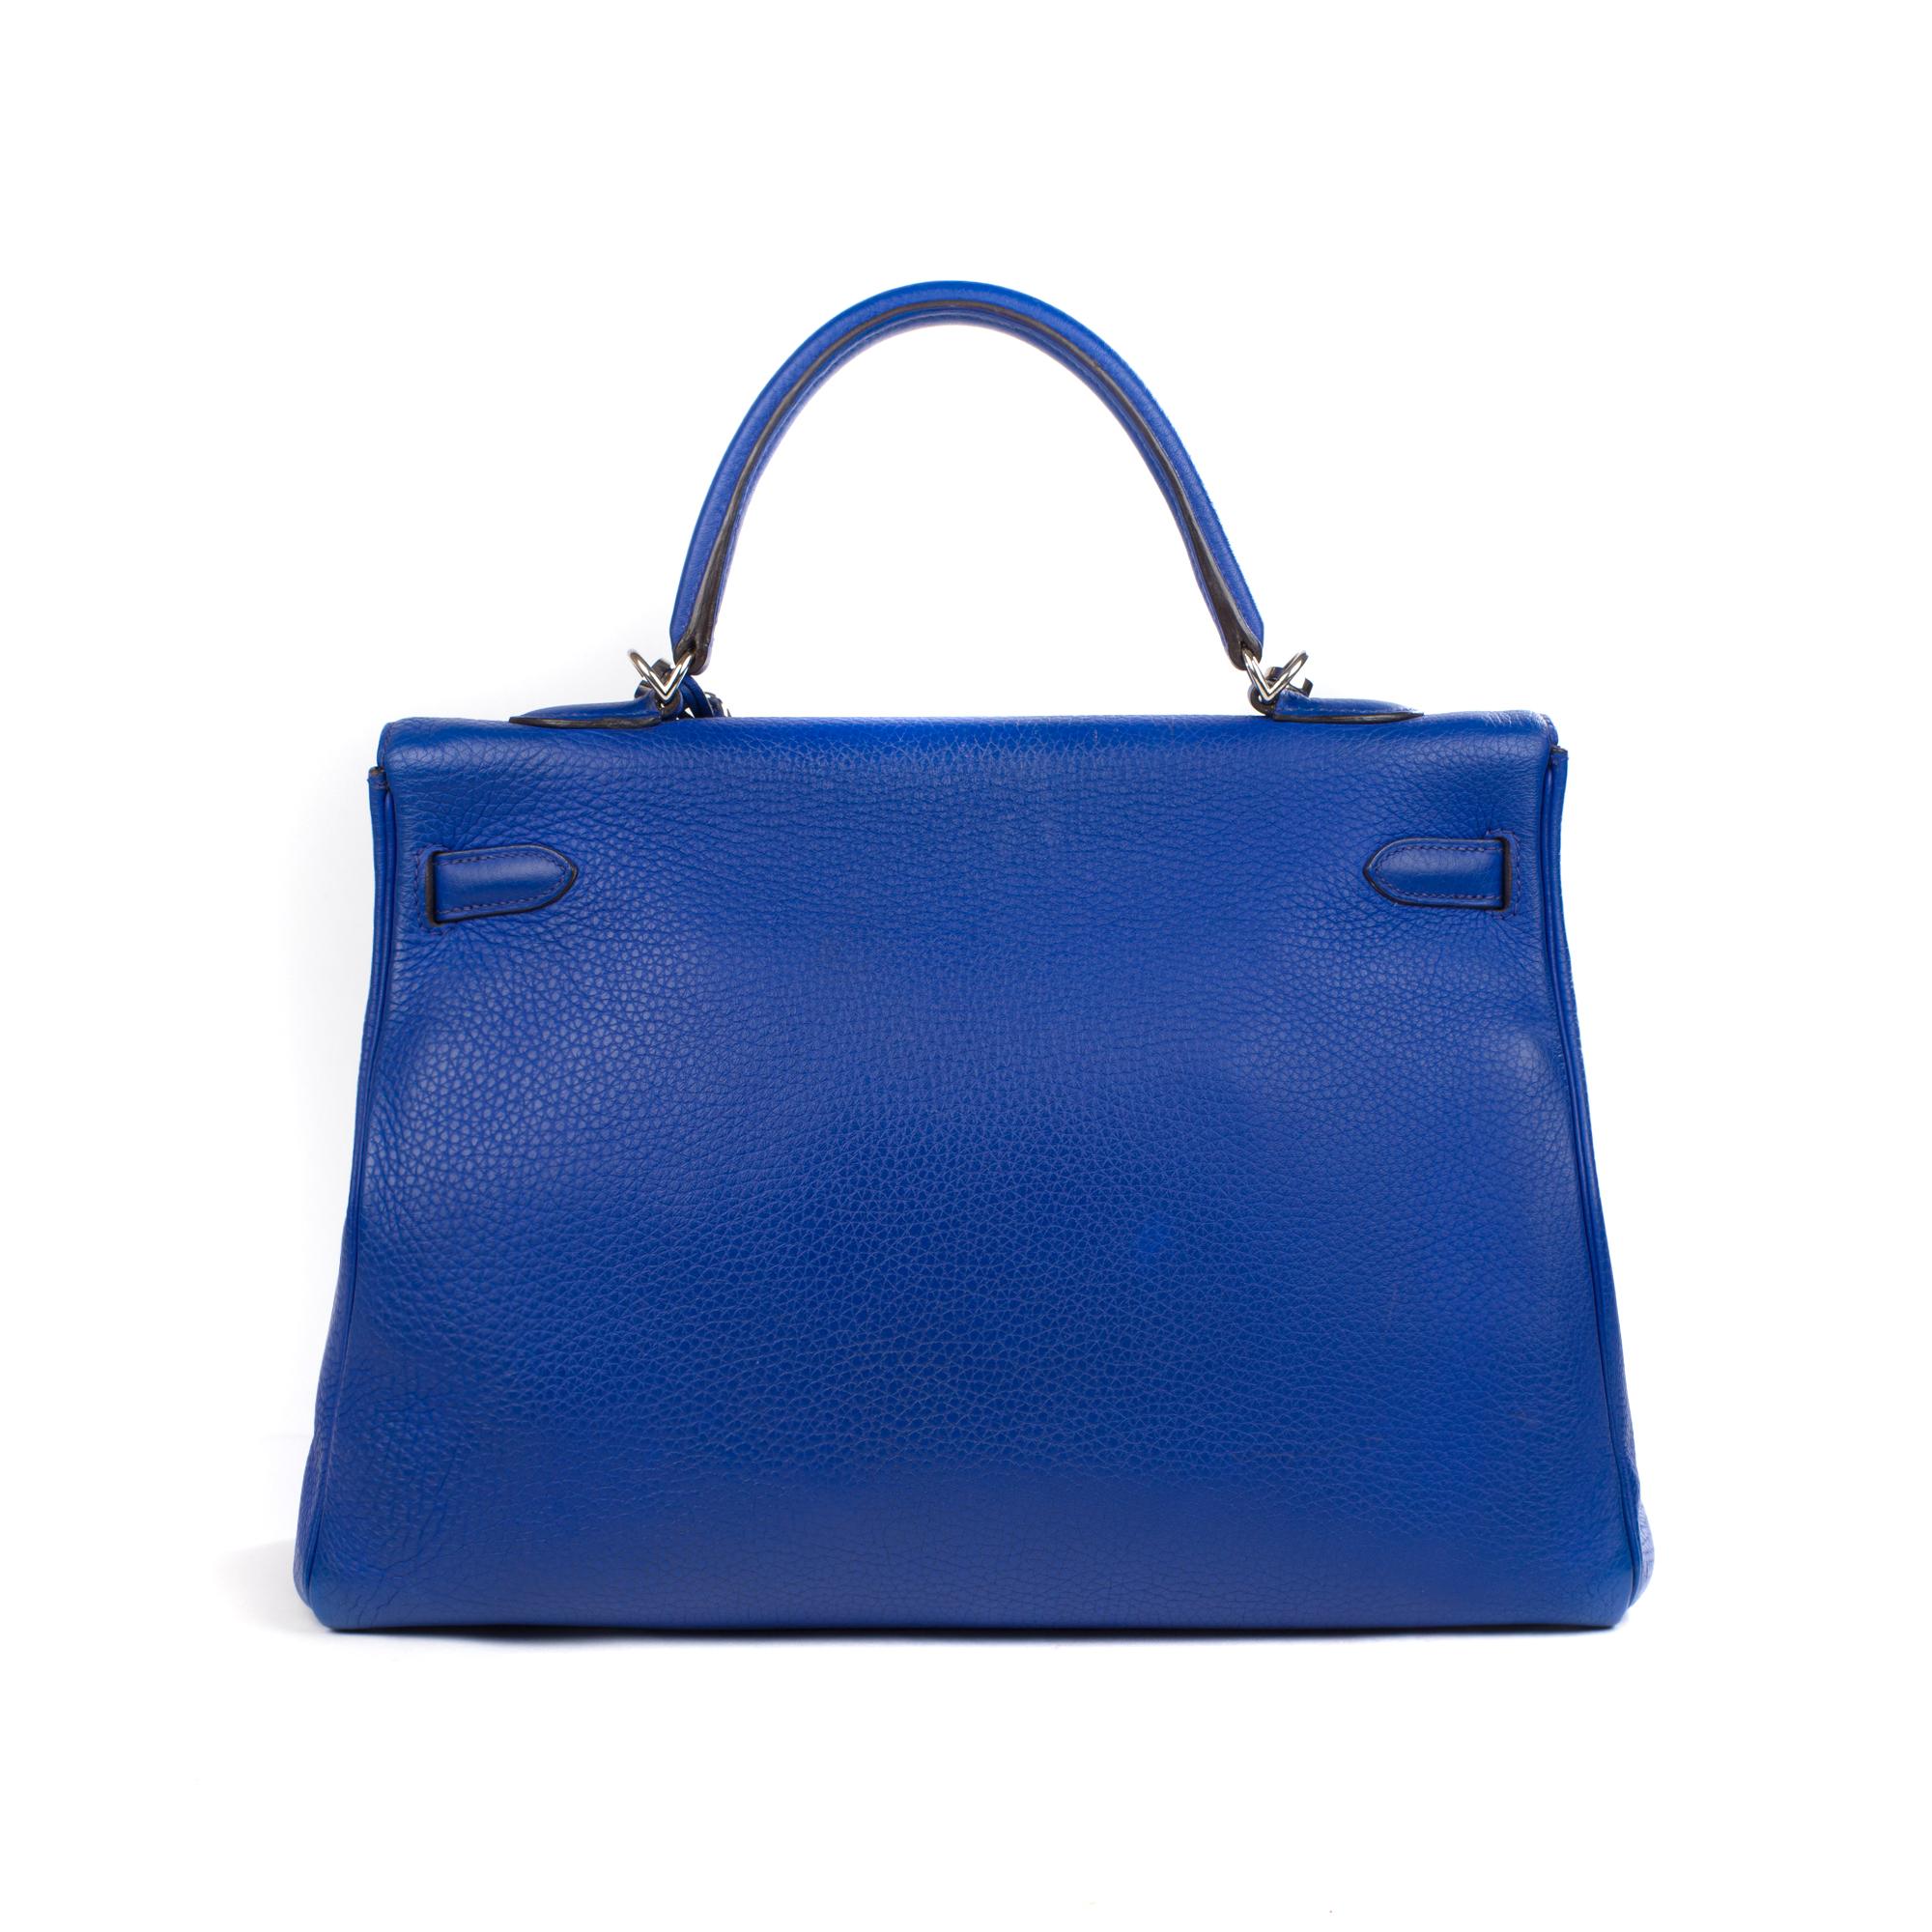 Superb Hermes Kelly purse 35 cm in leather Taurillon Clémence purple blue, palladium hardware, blue leather handle with removable shoulder strap in blue leather allowing hand or shoulder carry.

Flap closure.
Inner lining in blue leather, a zipped